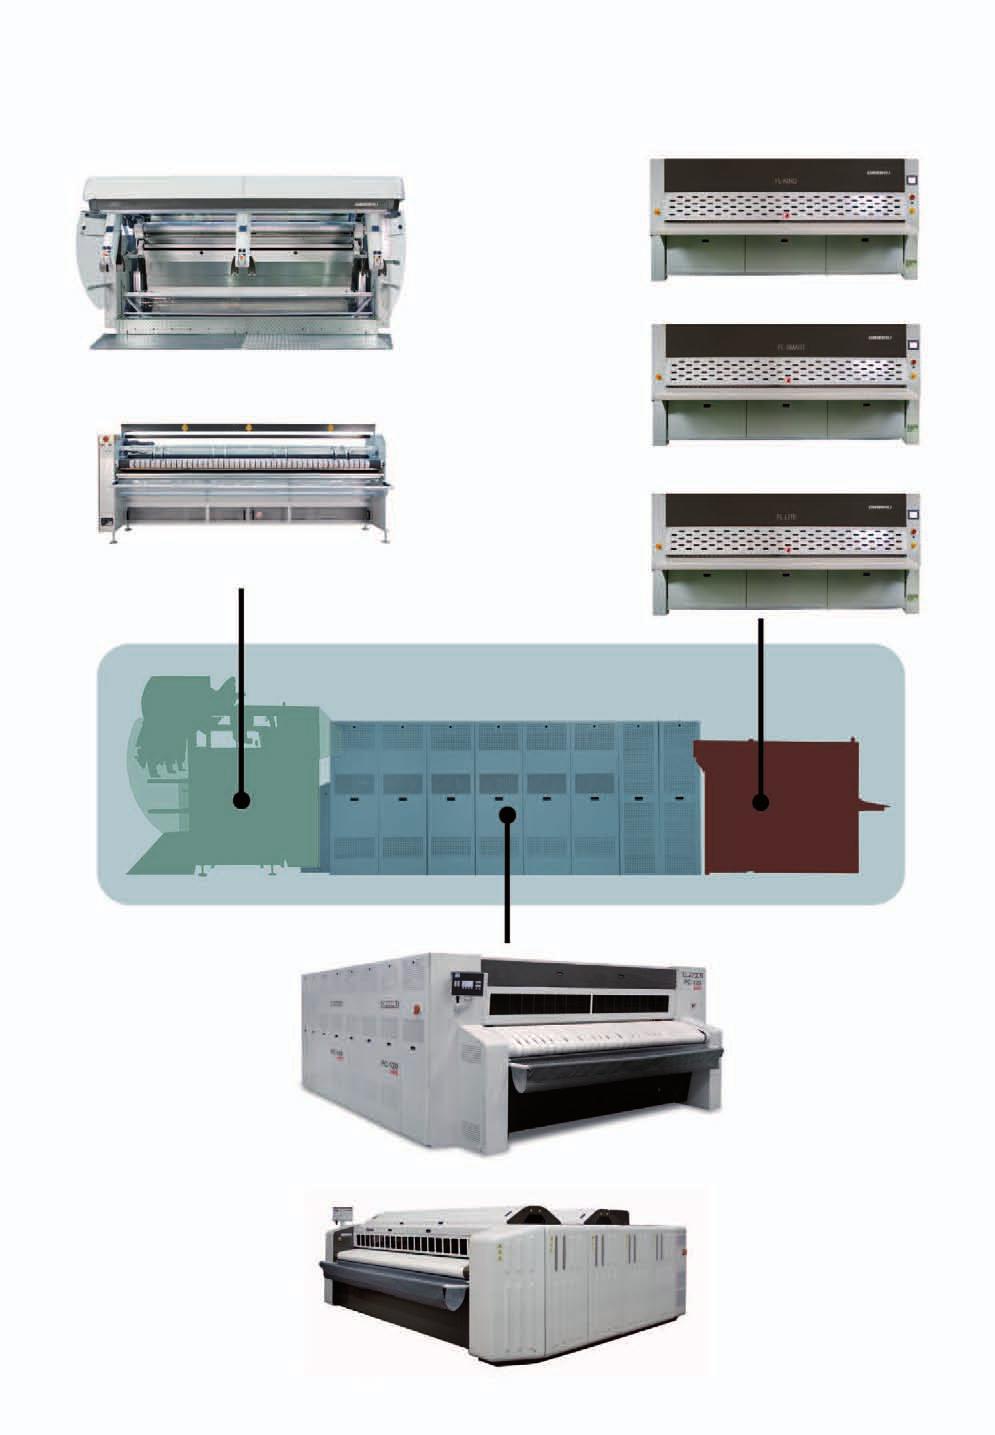 FLATWORK LINE CONFIGURATIONS The flatwork line consists of a laundry feeder, a flatwork ironer, and lastly, a folder with stacker. There are different configuration possibilities.